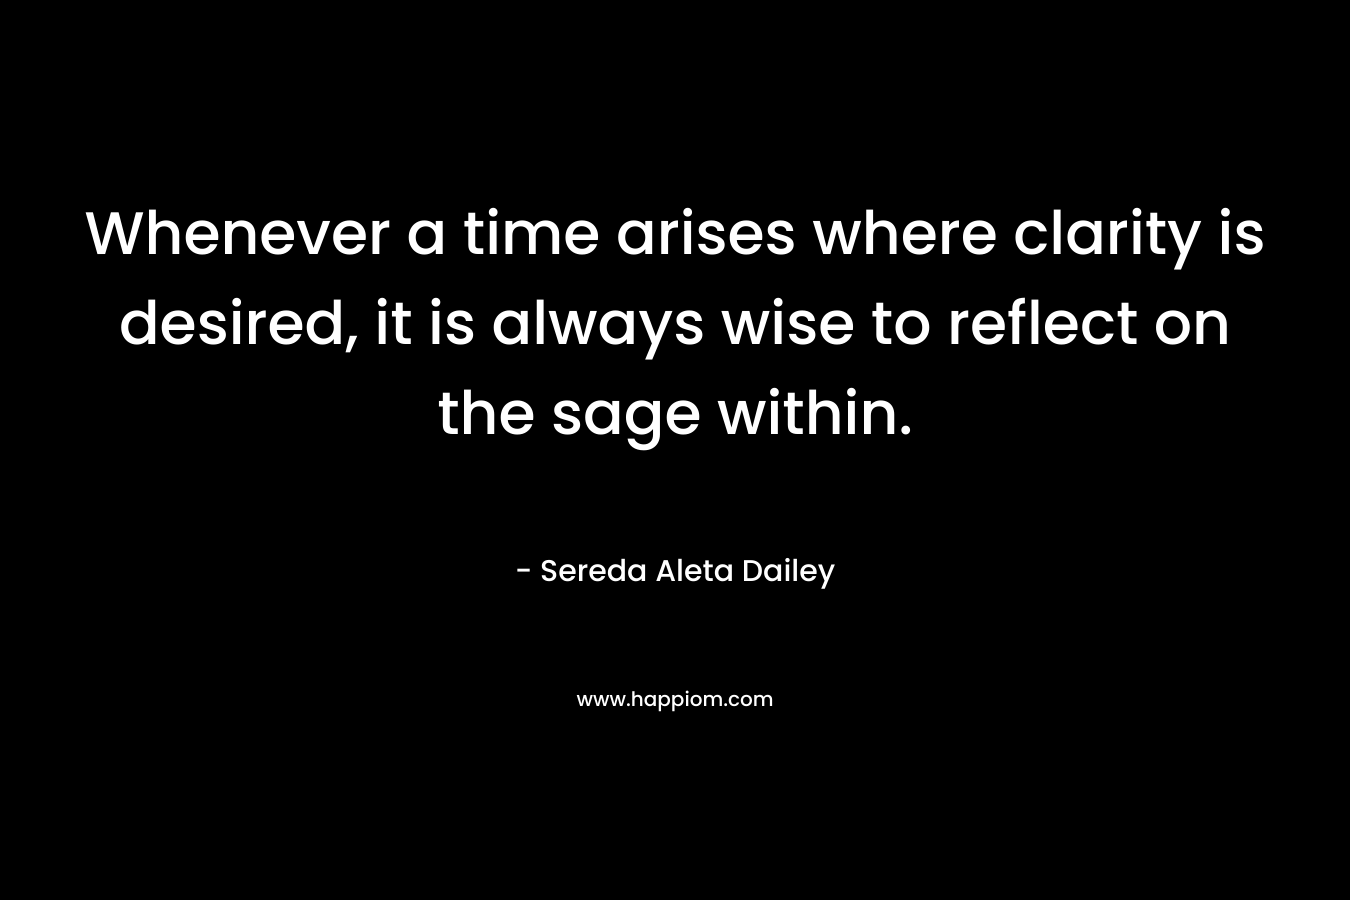 Whenever a time arises where clarity is desired, it is always wise to reflect on the sage within. – Sereda Aleta Dailey